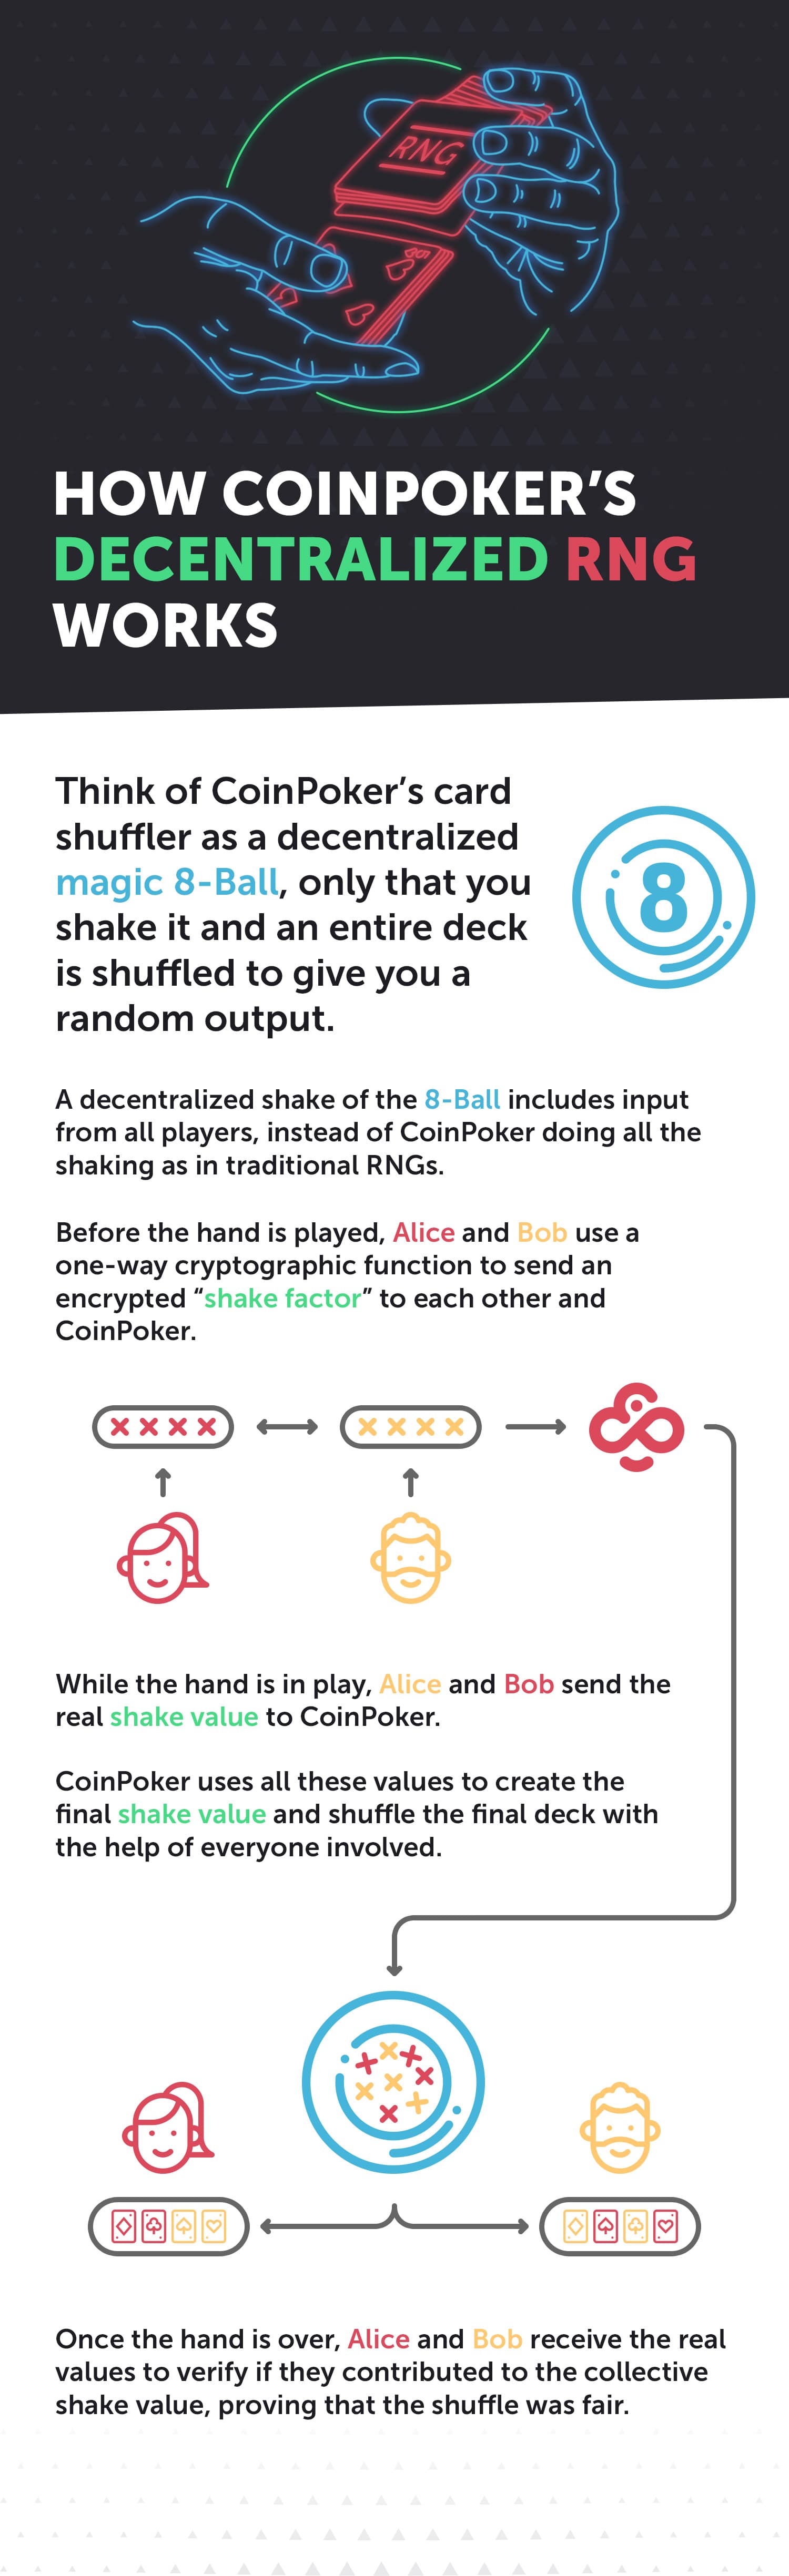 How CoinPoker's decentralized RNG works